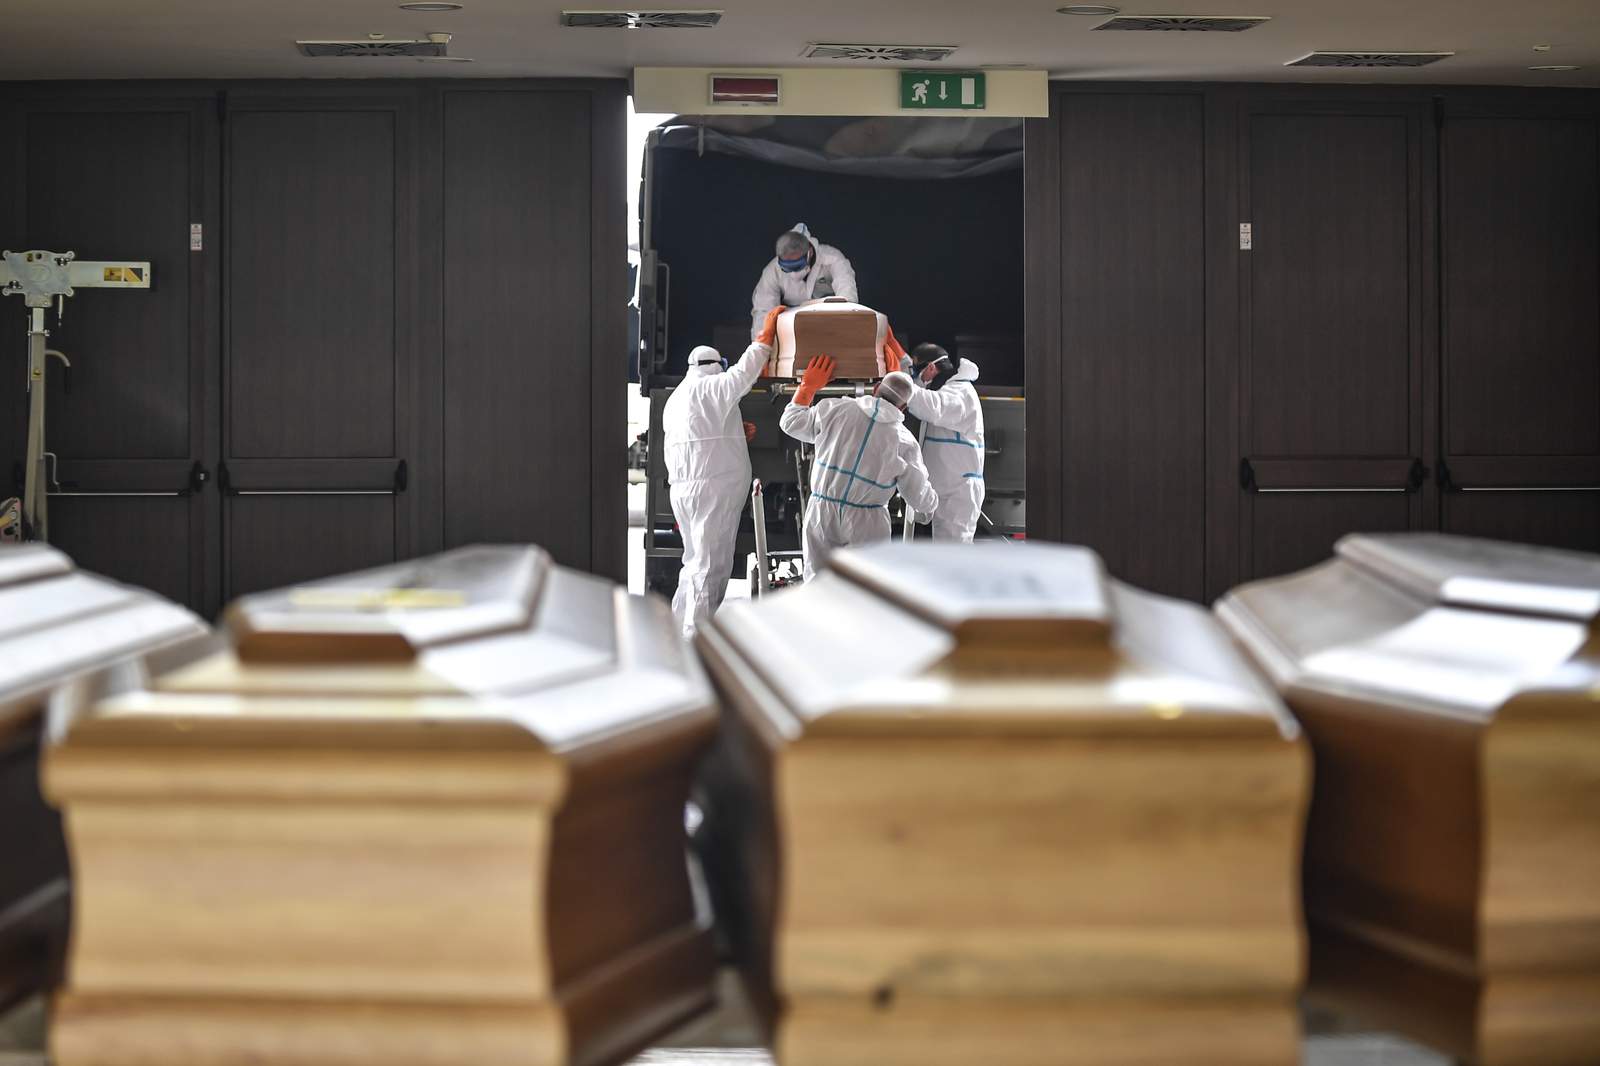 Coffins arriving from the Bergamo area, where the coronavirus infections caused many victims, are being unloaded from a military truck that transported them in the cemetery of Cinisello Balsamo, near Milan in Northern Italy, Friday, March 27, 2020.  The new coronavirus causes mild or moderate symptoms for most people, but for some, especially older adults and people with existing health problems, it can cause more severe illness or death.  (Claudio Furlan/LaPresse via AP)